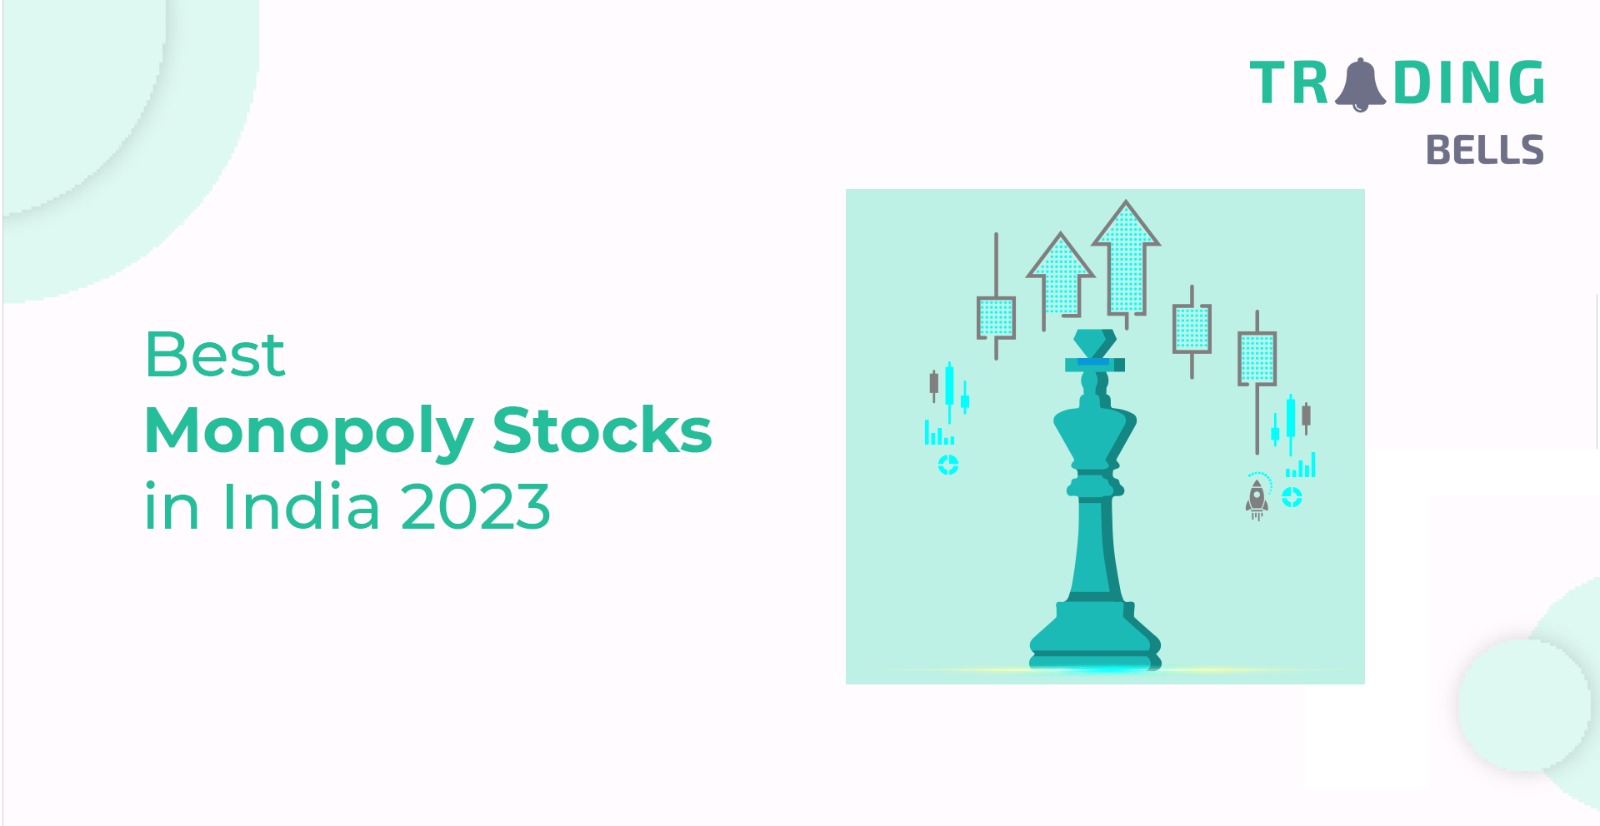 Best Monopoly Stocks in India 2023